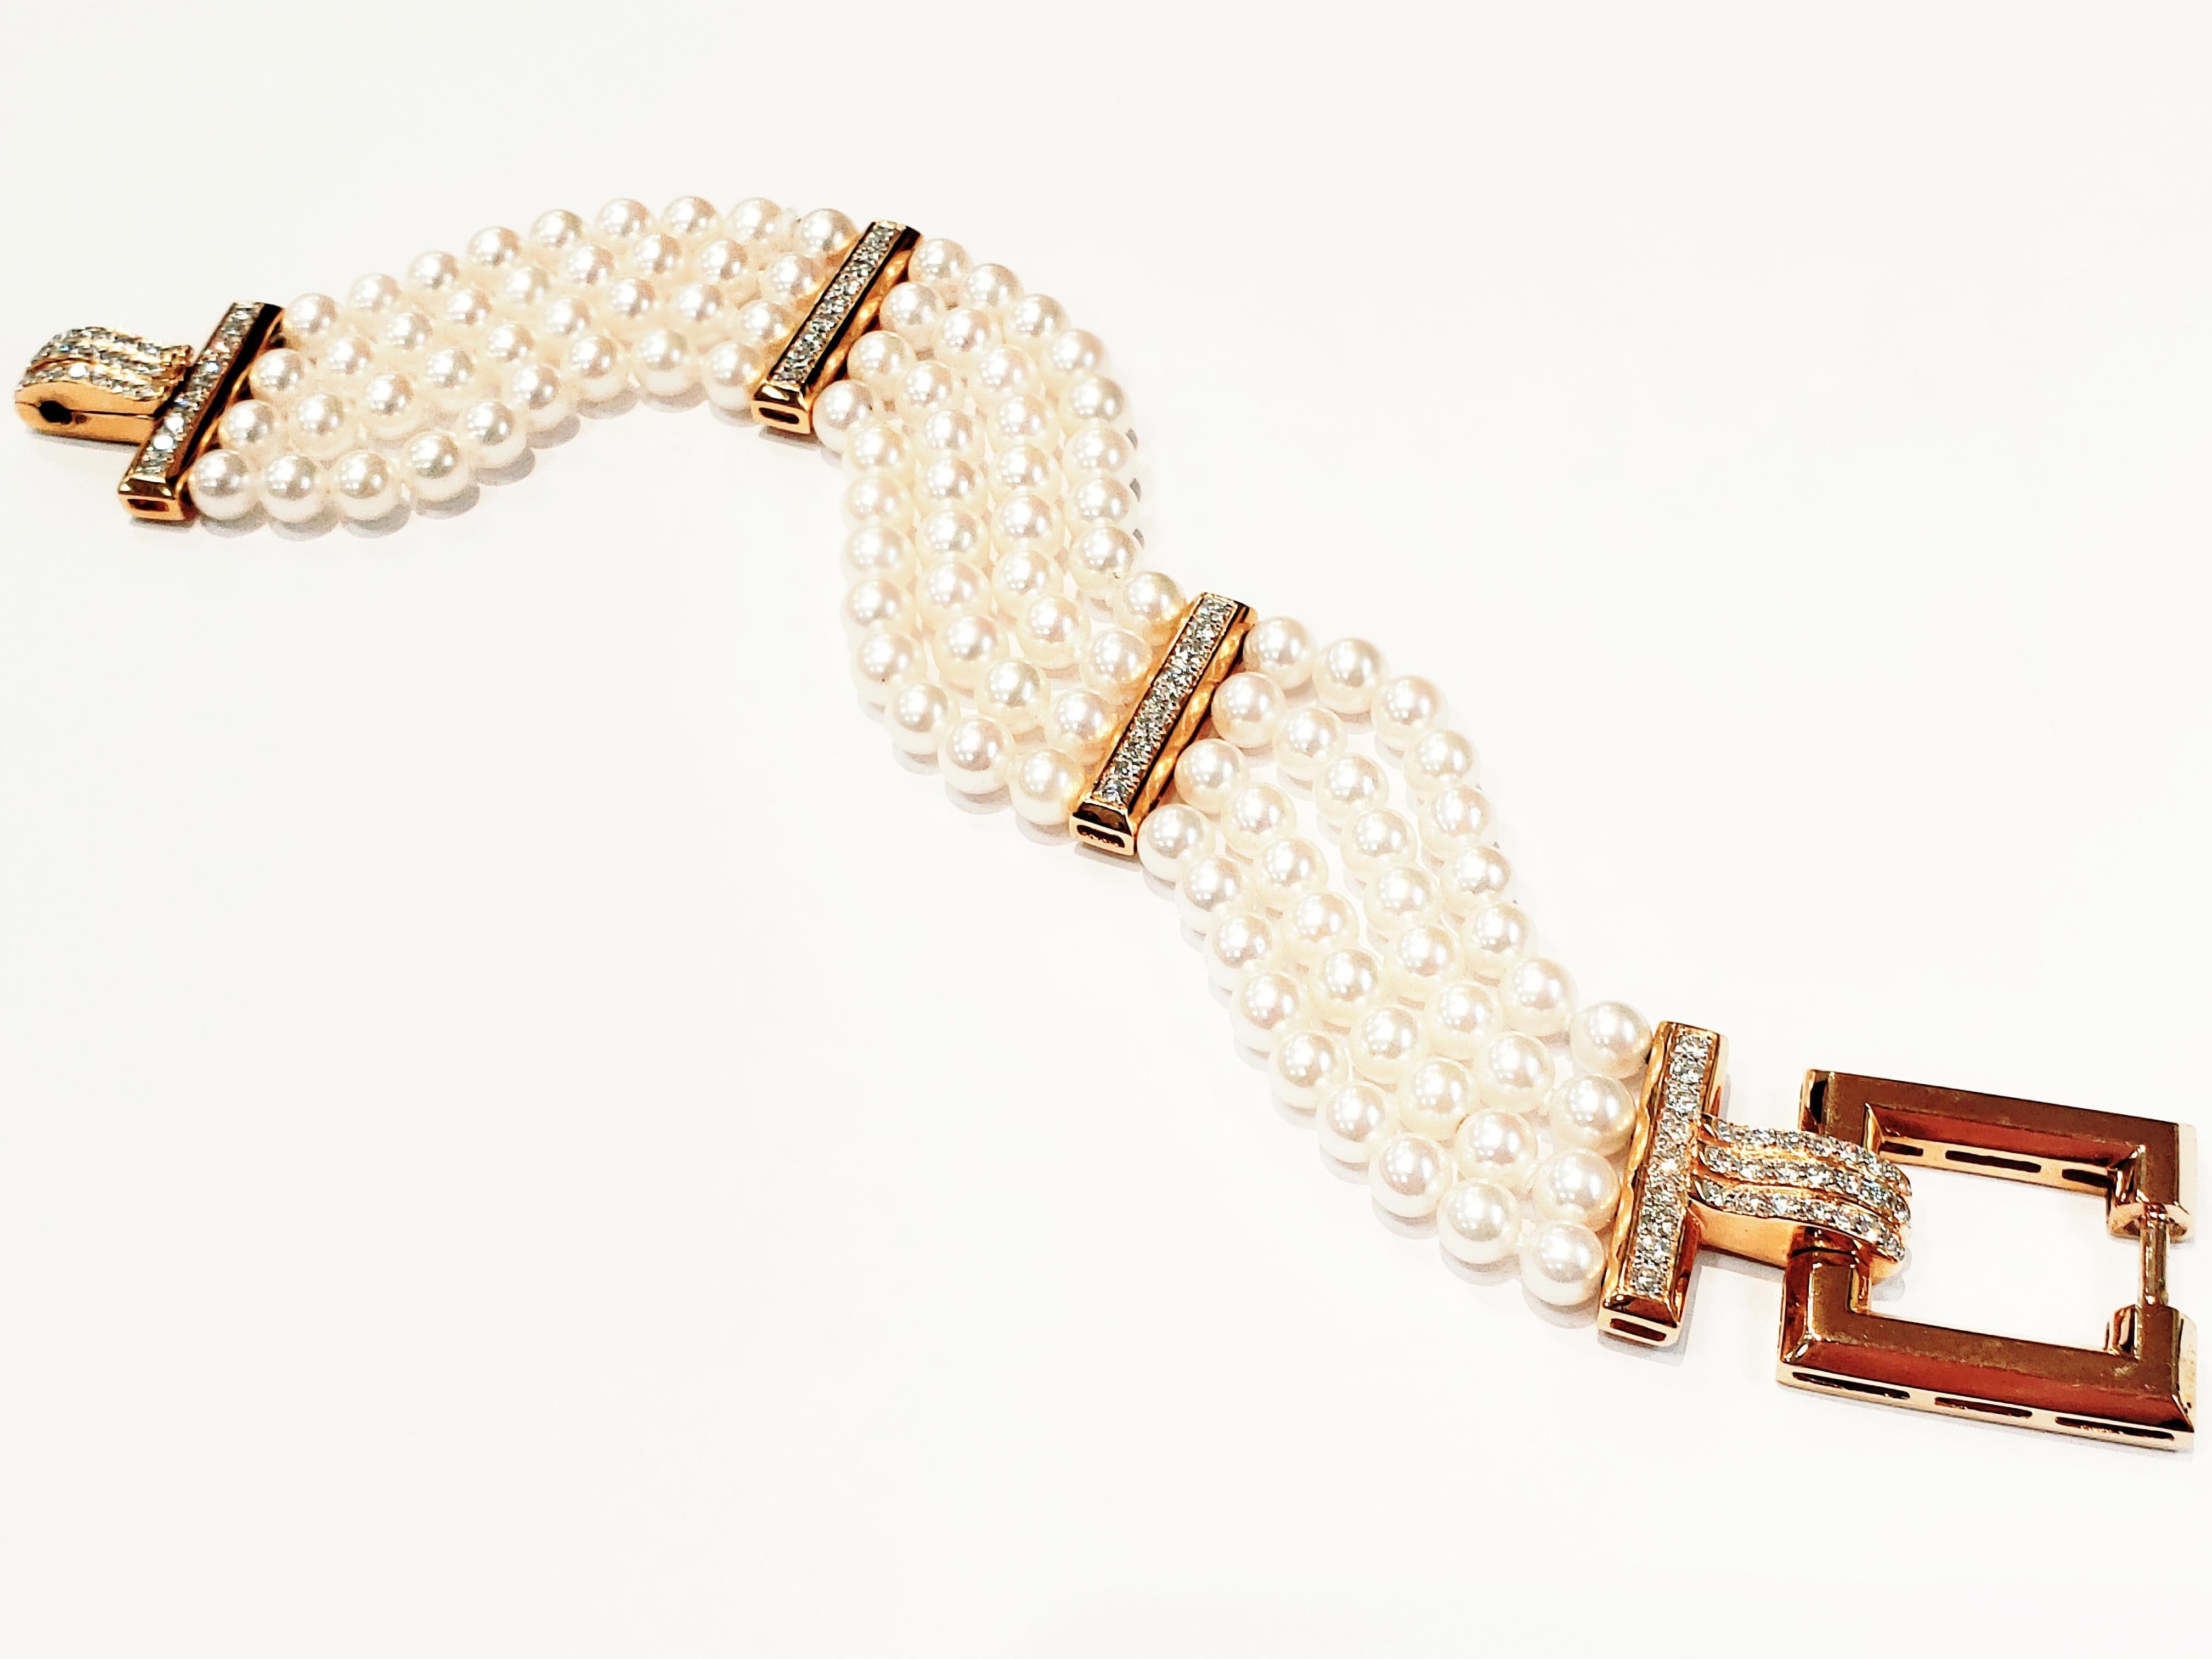 A Four Row Cultured Pearl Bracelet, With 18 Karat Yellow Gold And Diamond Spacers, And Clasp.
Each Section Has Four Rows, Each With Nine Pearls. Between Sections, Is A Gold Bar Set With Nine Round Diamonds.
Clasp Is A Gold Open Square, With Diamond